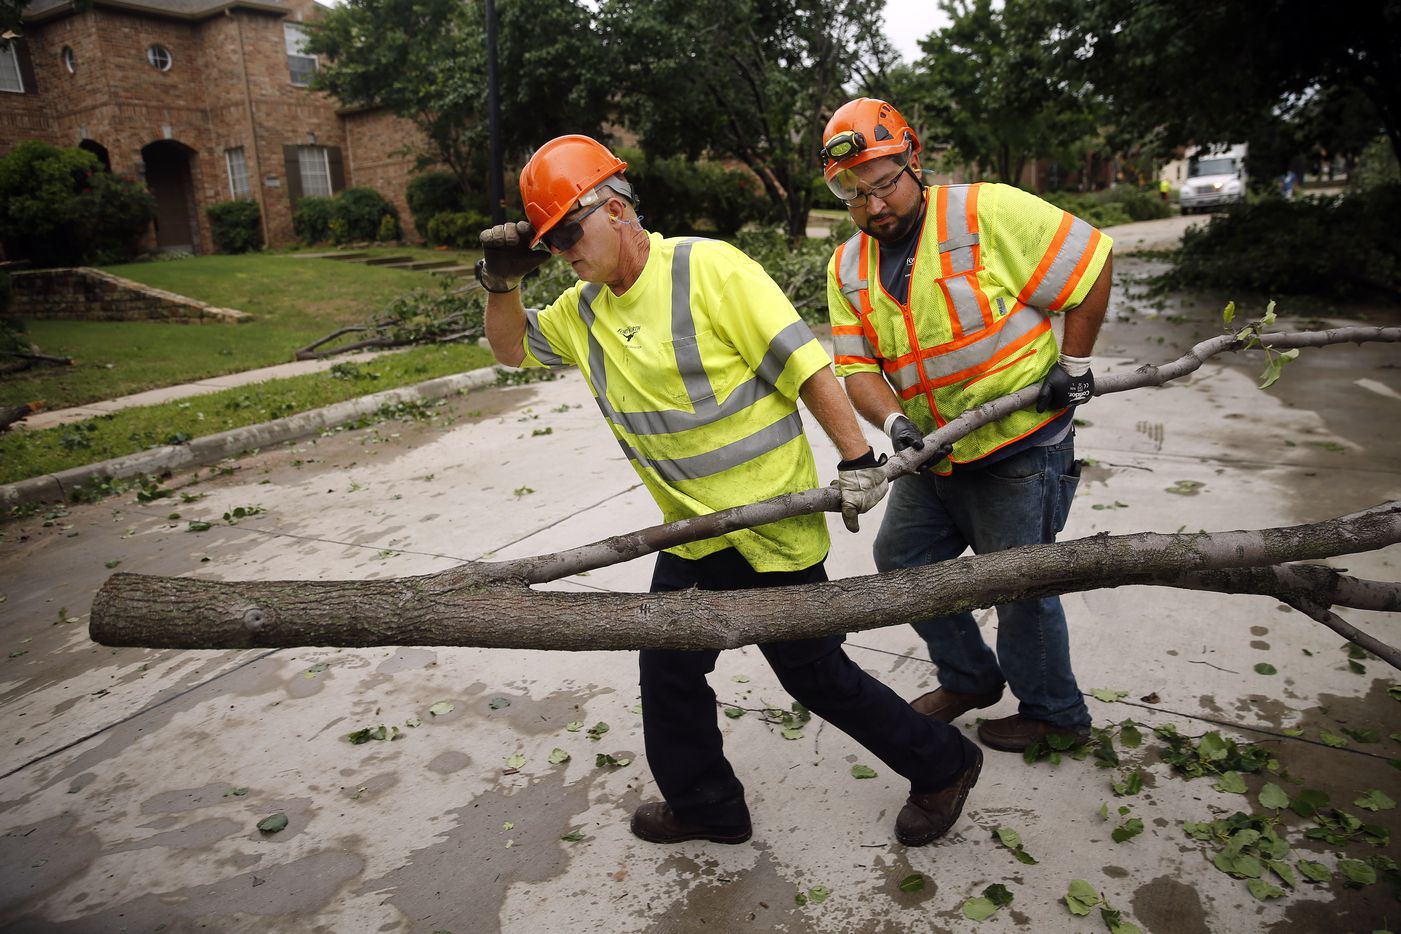 Fort Worth Park and Recreation crews clean up downed Bradford pear trees on Pendleton Dr. in North Fort Worth after winds toppled trees and tore shingles off homes, Wednesday, May 29, 2019. A tornado warned storm passed through the neighborhood near Heritage Trace Pkwy and N. Riverside Dr. 